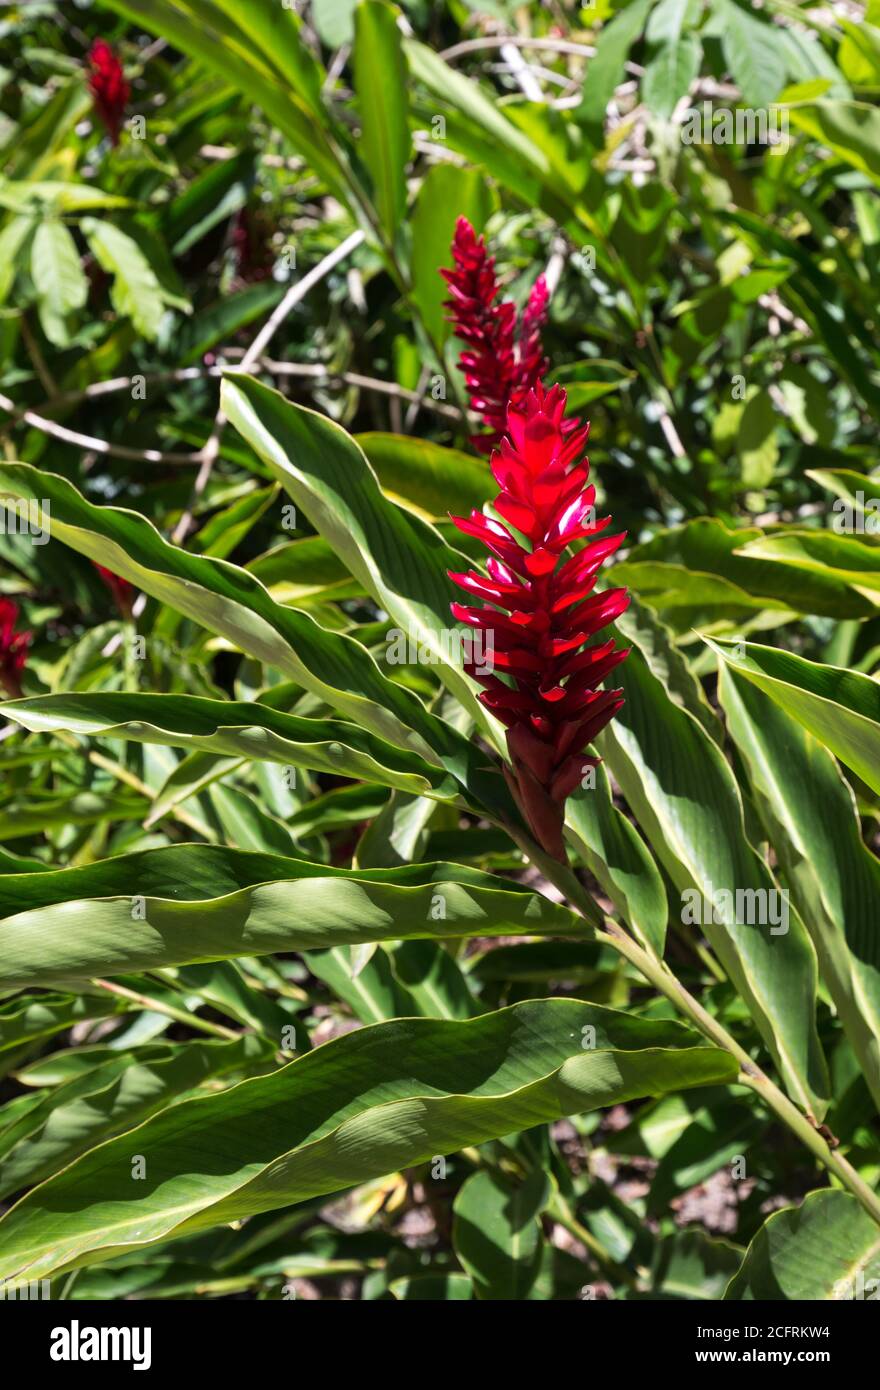 Bright Red Flowering Bromeliad Plant With Large Shiny Leaves After It Has Finished Flowering The Plant Will Die Leaving Only Small Pups Which Will Stock Photo Alamy